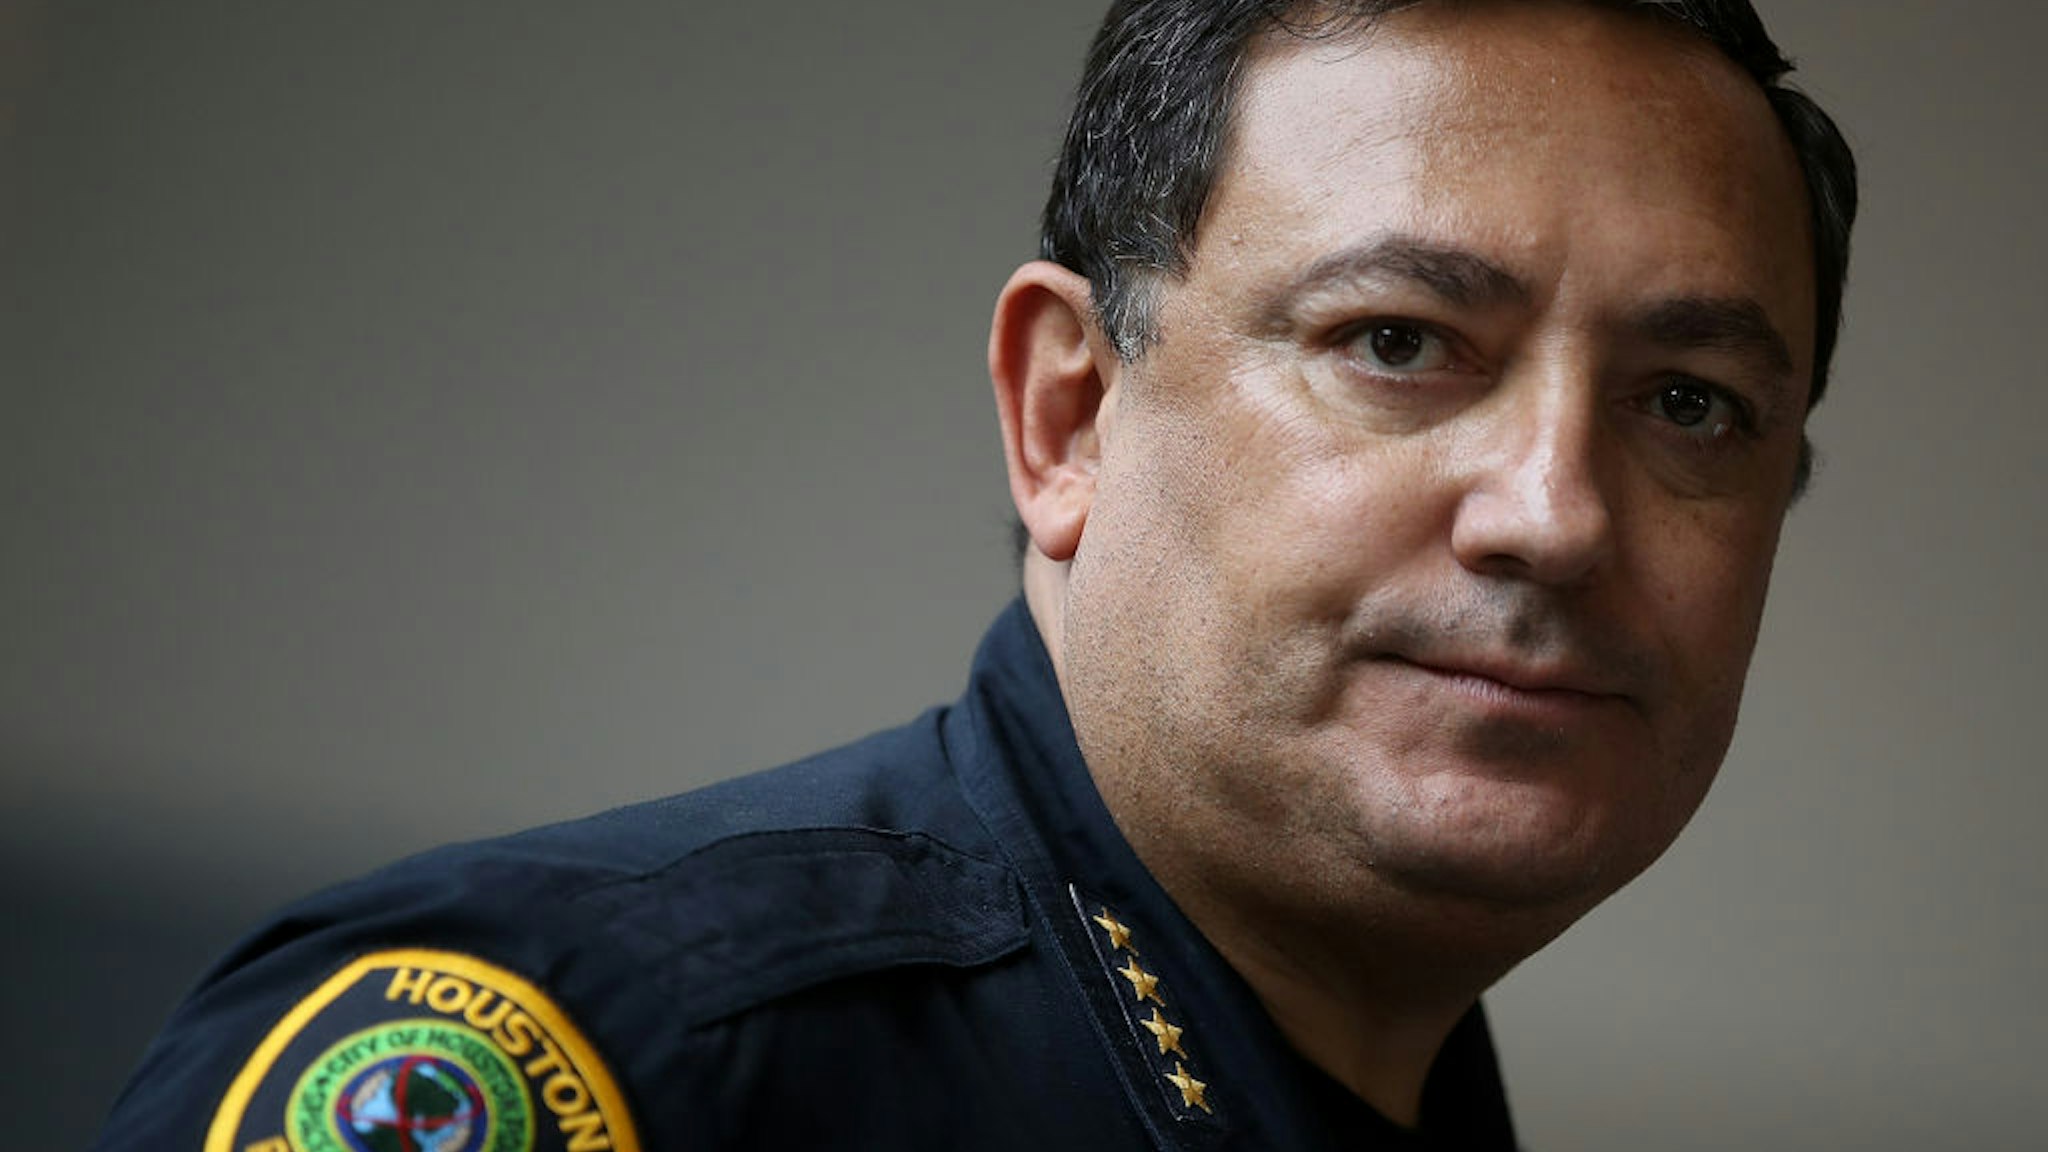 HOUSTON, TX - SEPTEMBER 04: Houston police chief Art Acevedo looks on during a press conference following a tour of the NRG Center evacuation center on September 4, 2017 in Houston, Texas. Over a week after Hurricane Harvey hit Southern Texas, residents are beginning the long process of recovering from the storm. (Photo by Justin Sullivan/Getty Images)